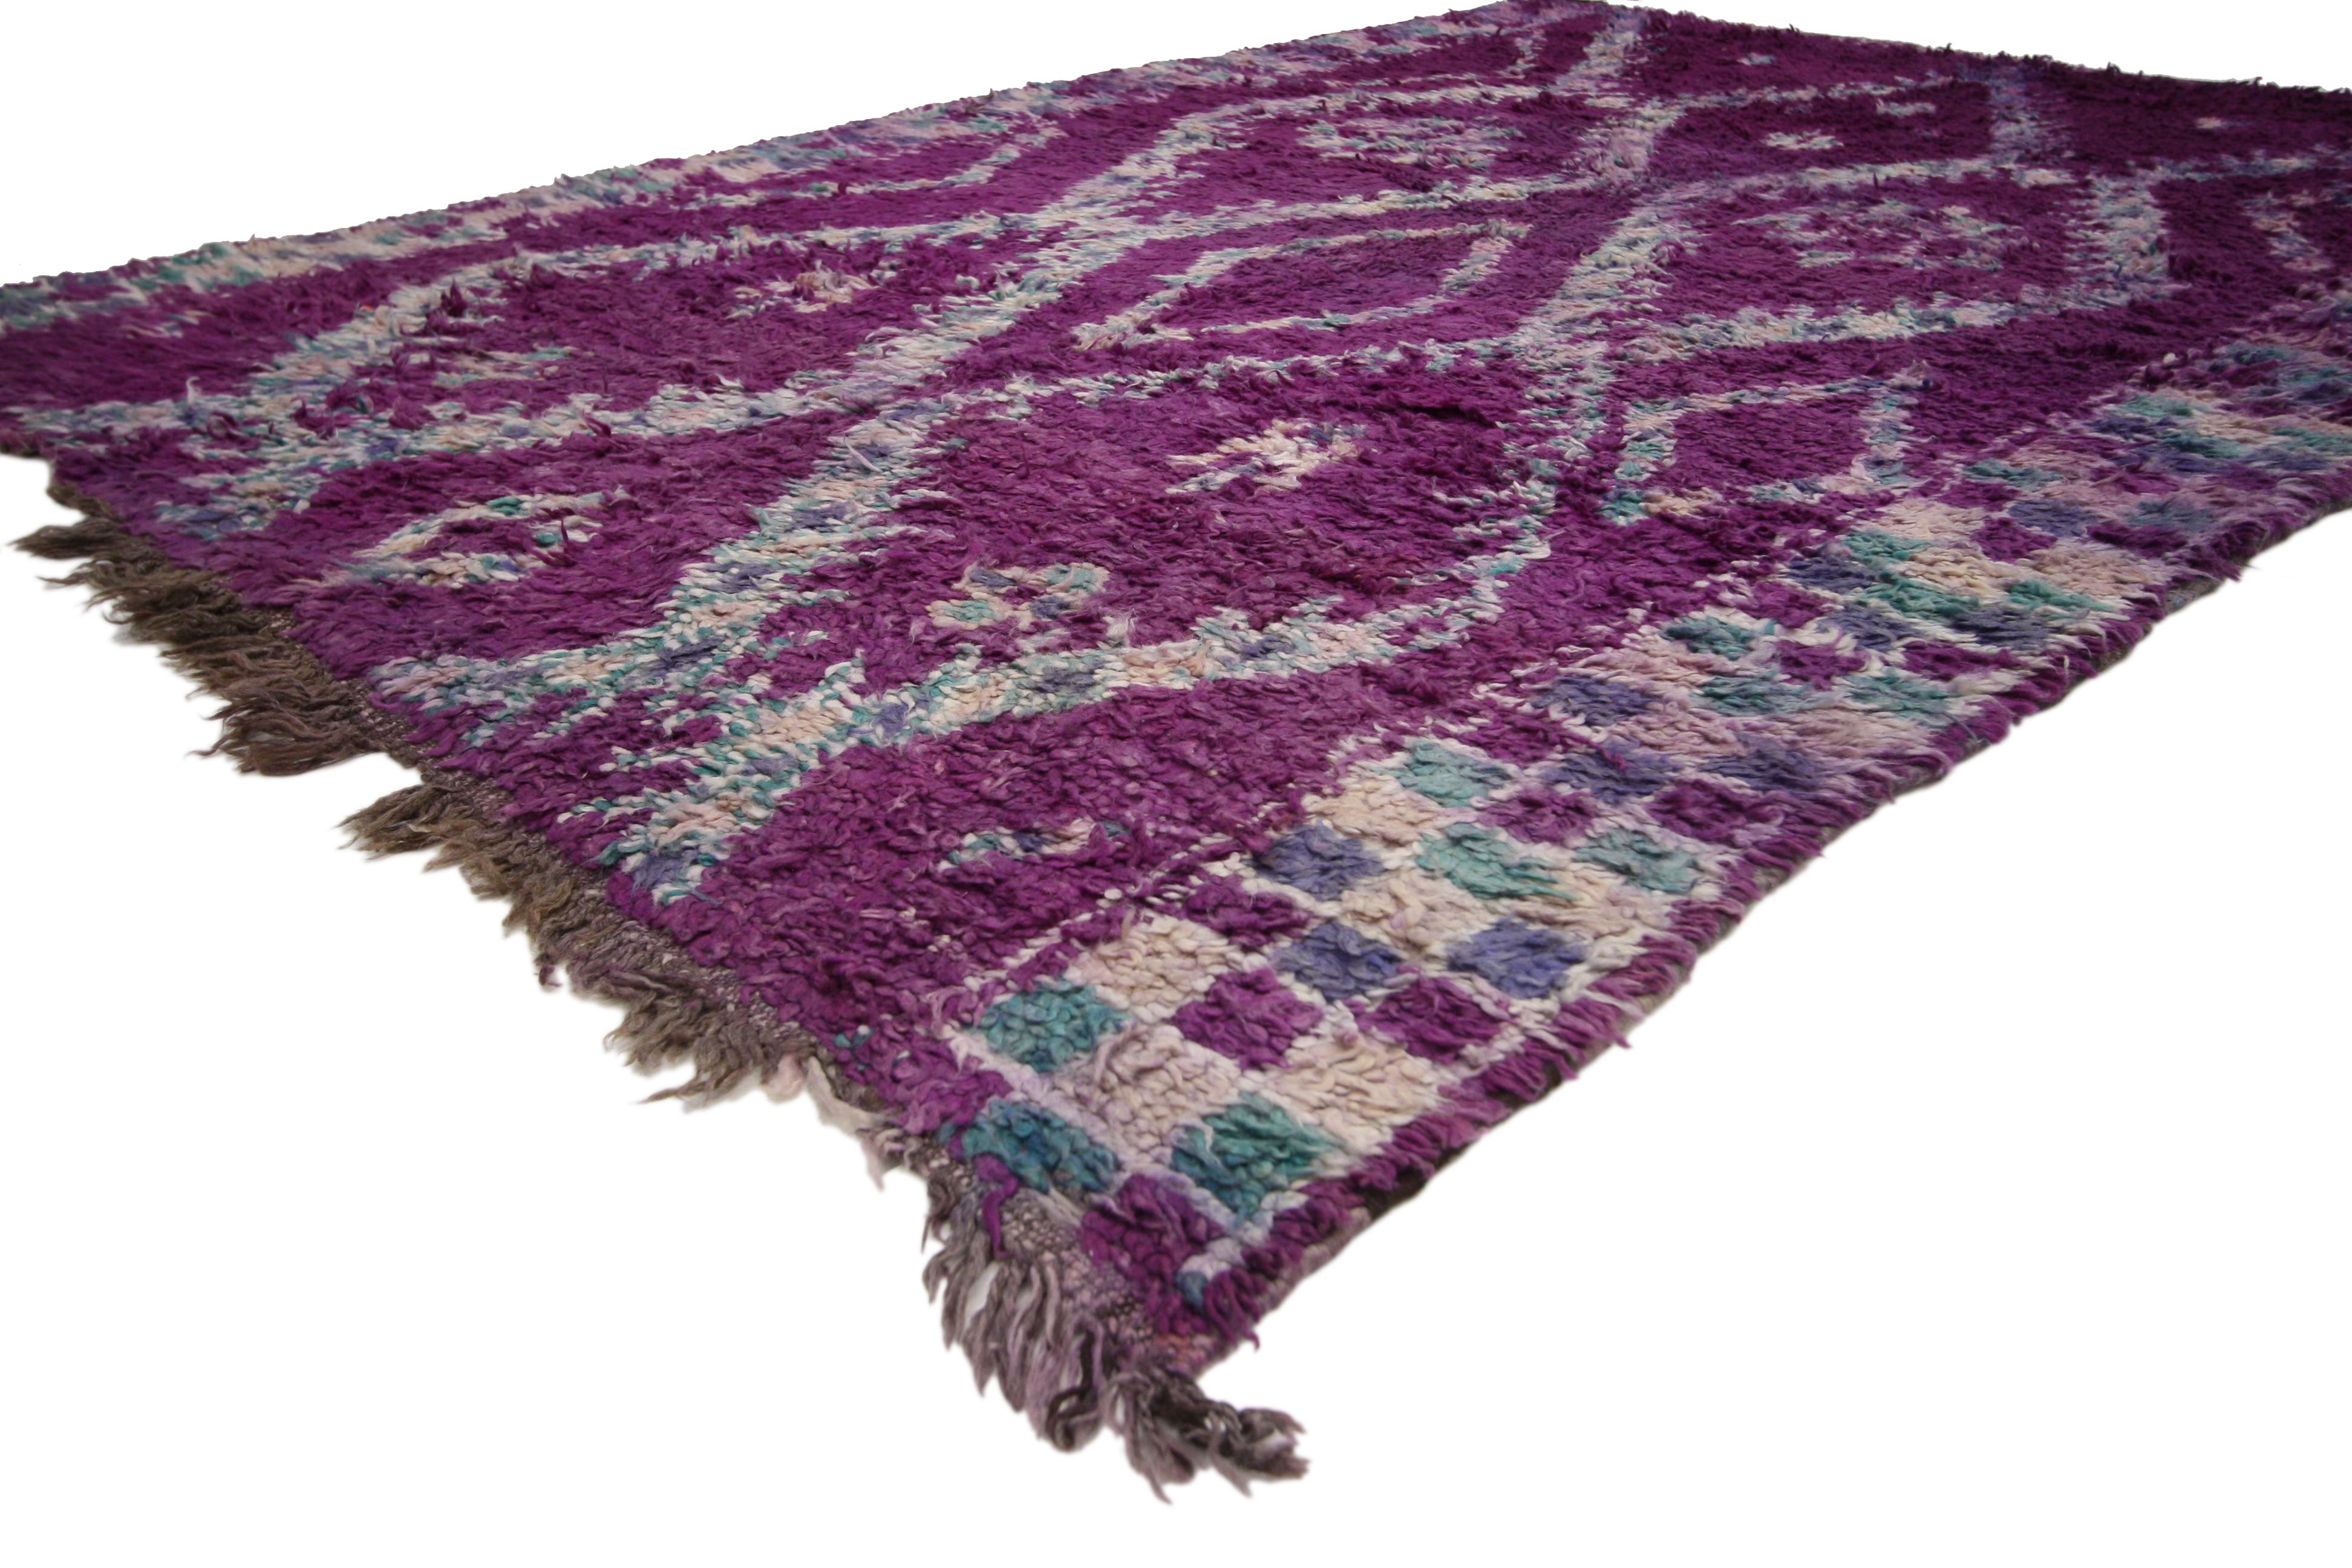 20685 vintage purple Beni M'Guild Moroccan rug with tribal style, Berber Moroccan rug. Impressive design and charismatic colors provide a beautiful backdrop for this purple Beni Mguild Moroccan rug. Rich in Ancient Berber symbolism, this vintage